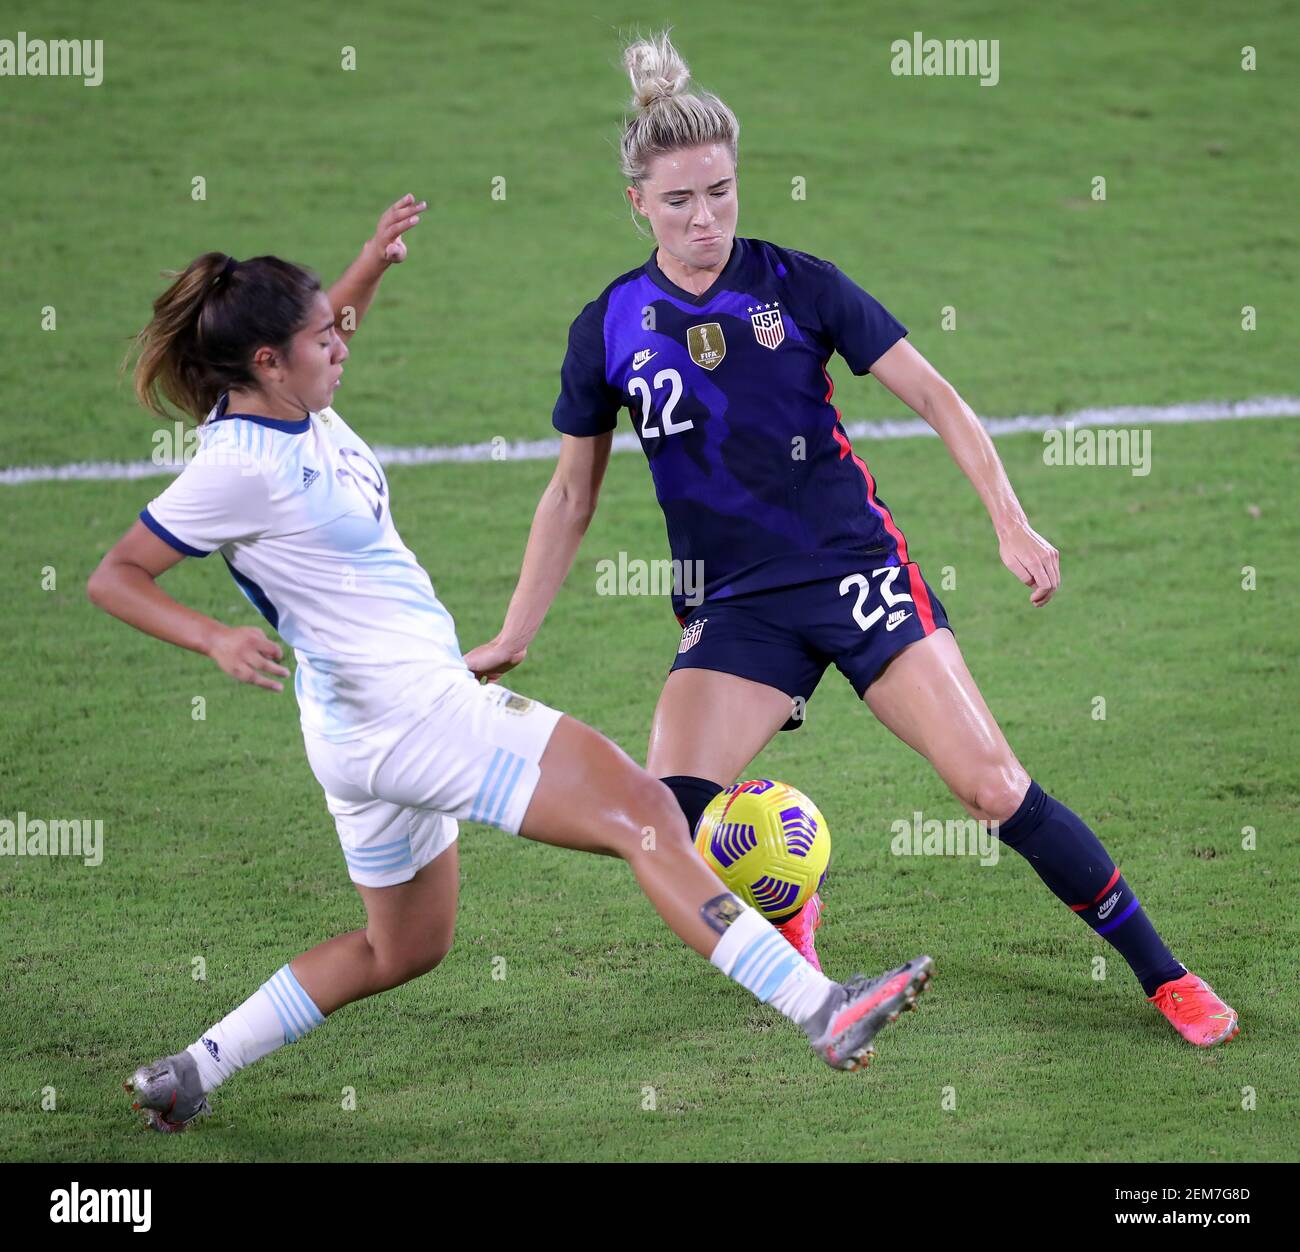 Orlando, Florida, USA. February 24, 2021: United States midfielder KRISTIE MEWIS (22) competes for the ball against Argentina midfielder DAIANA FALFAN (20) during the SheBelieves Cup USA vs Argentina match at Exploria Stadium in Orlando, Fl on February 24, 2021. Credit: Cory Knowlton/ZUMA Wire/Alamy Live News Stock Photo